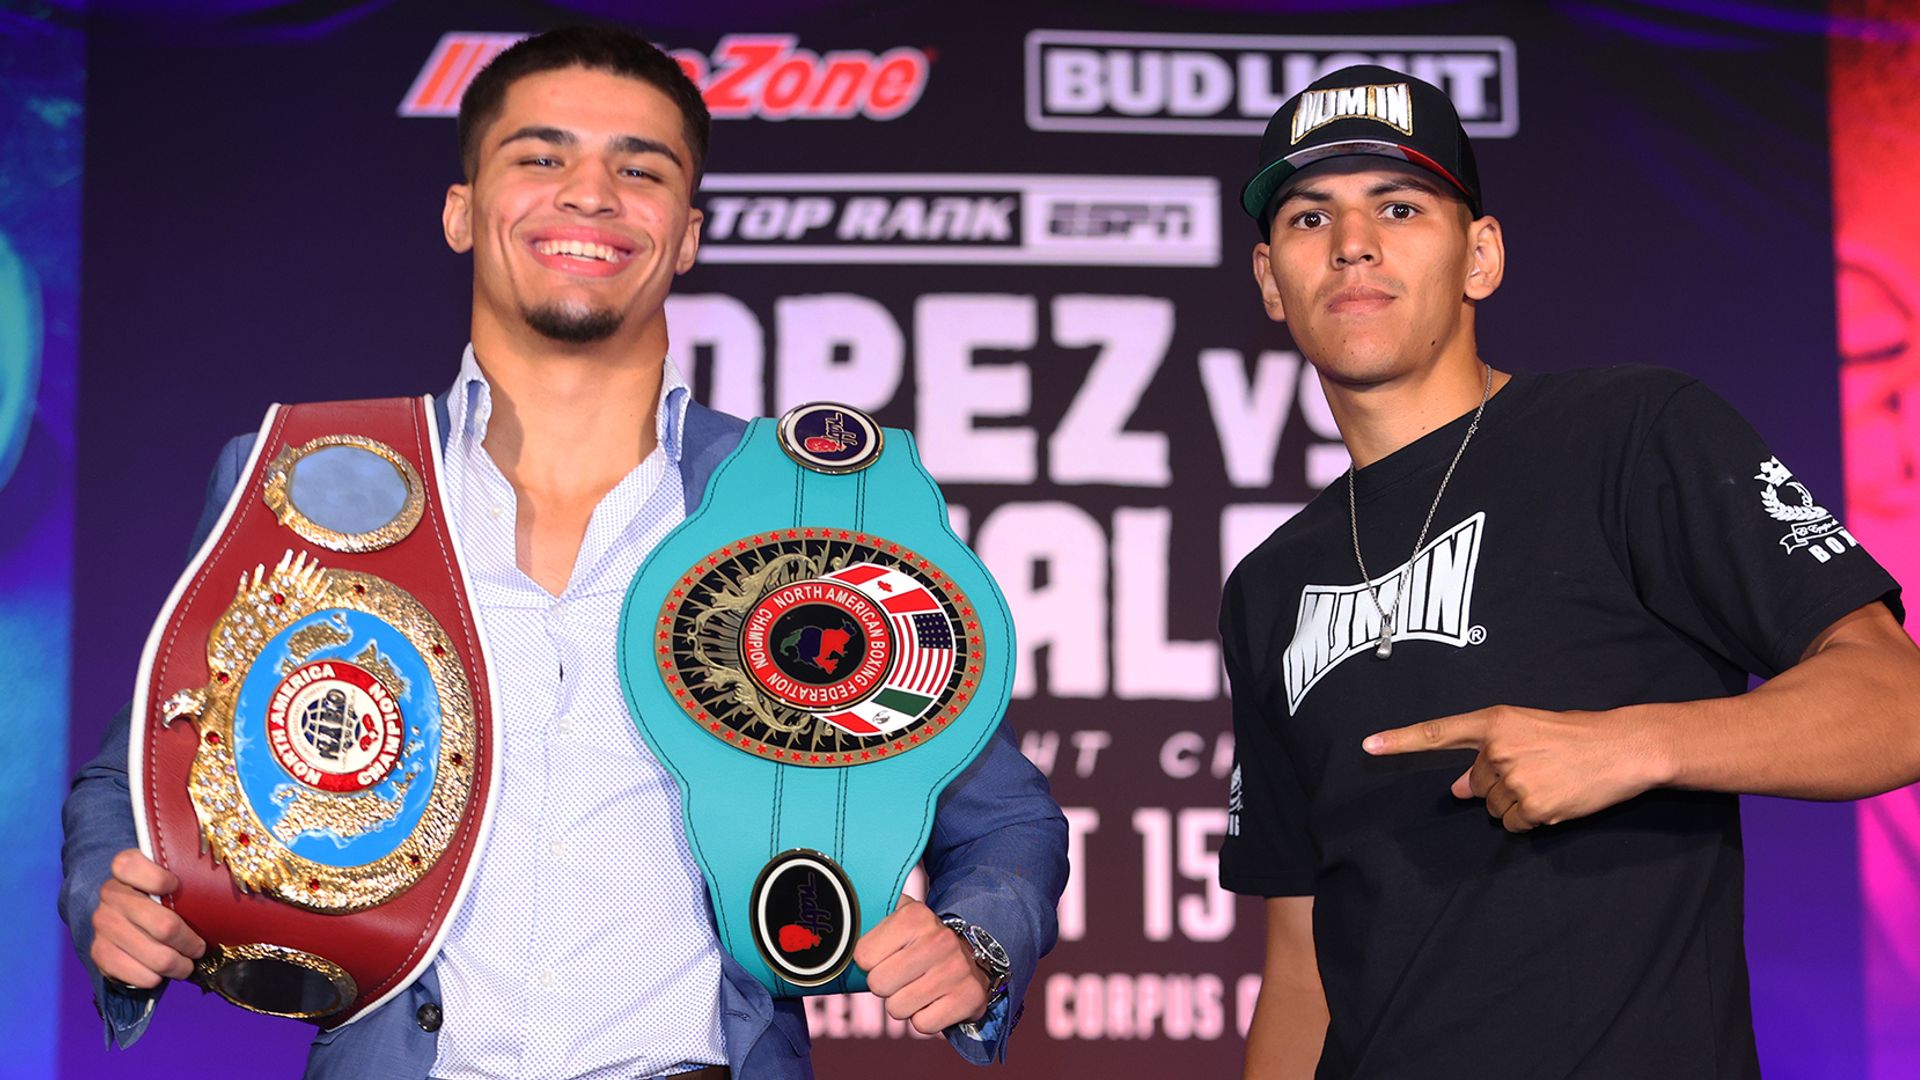 Zayas, 21, ready for title shot: 'I know what I can do'